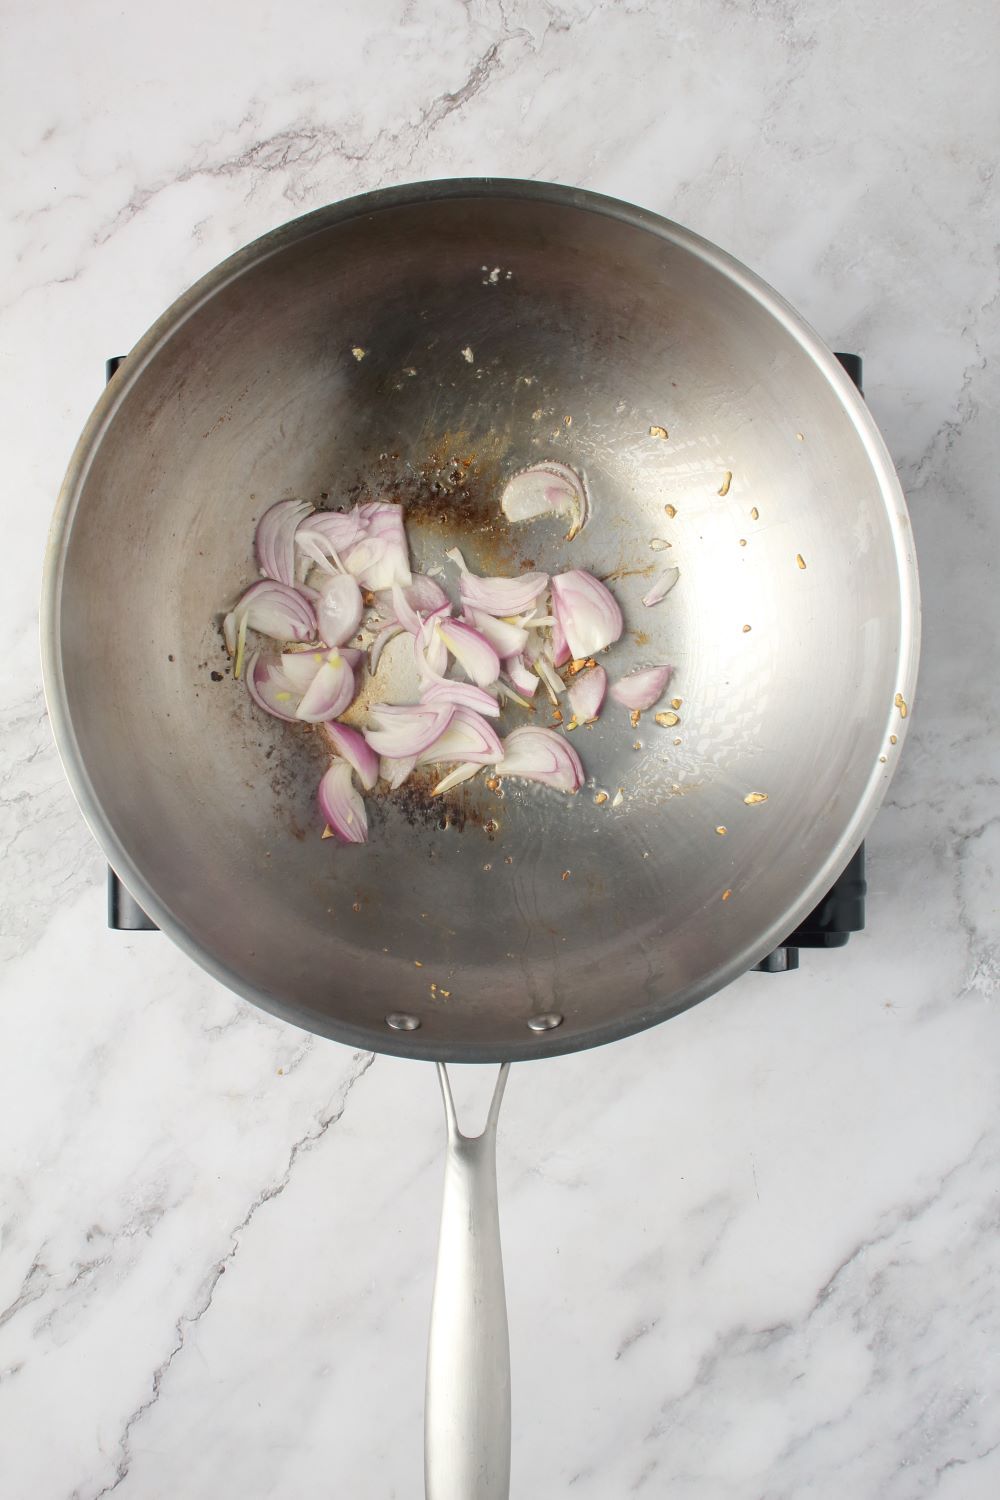 Sauteing red onions